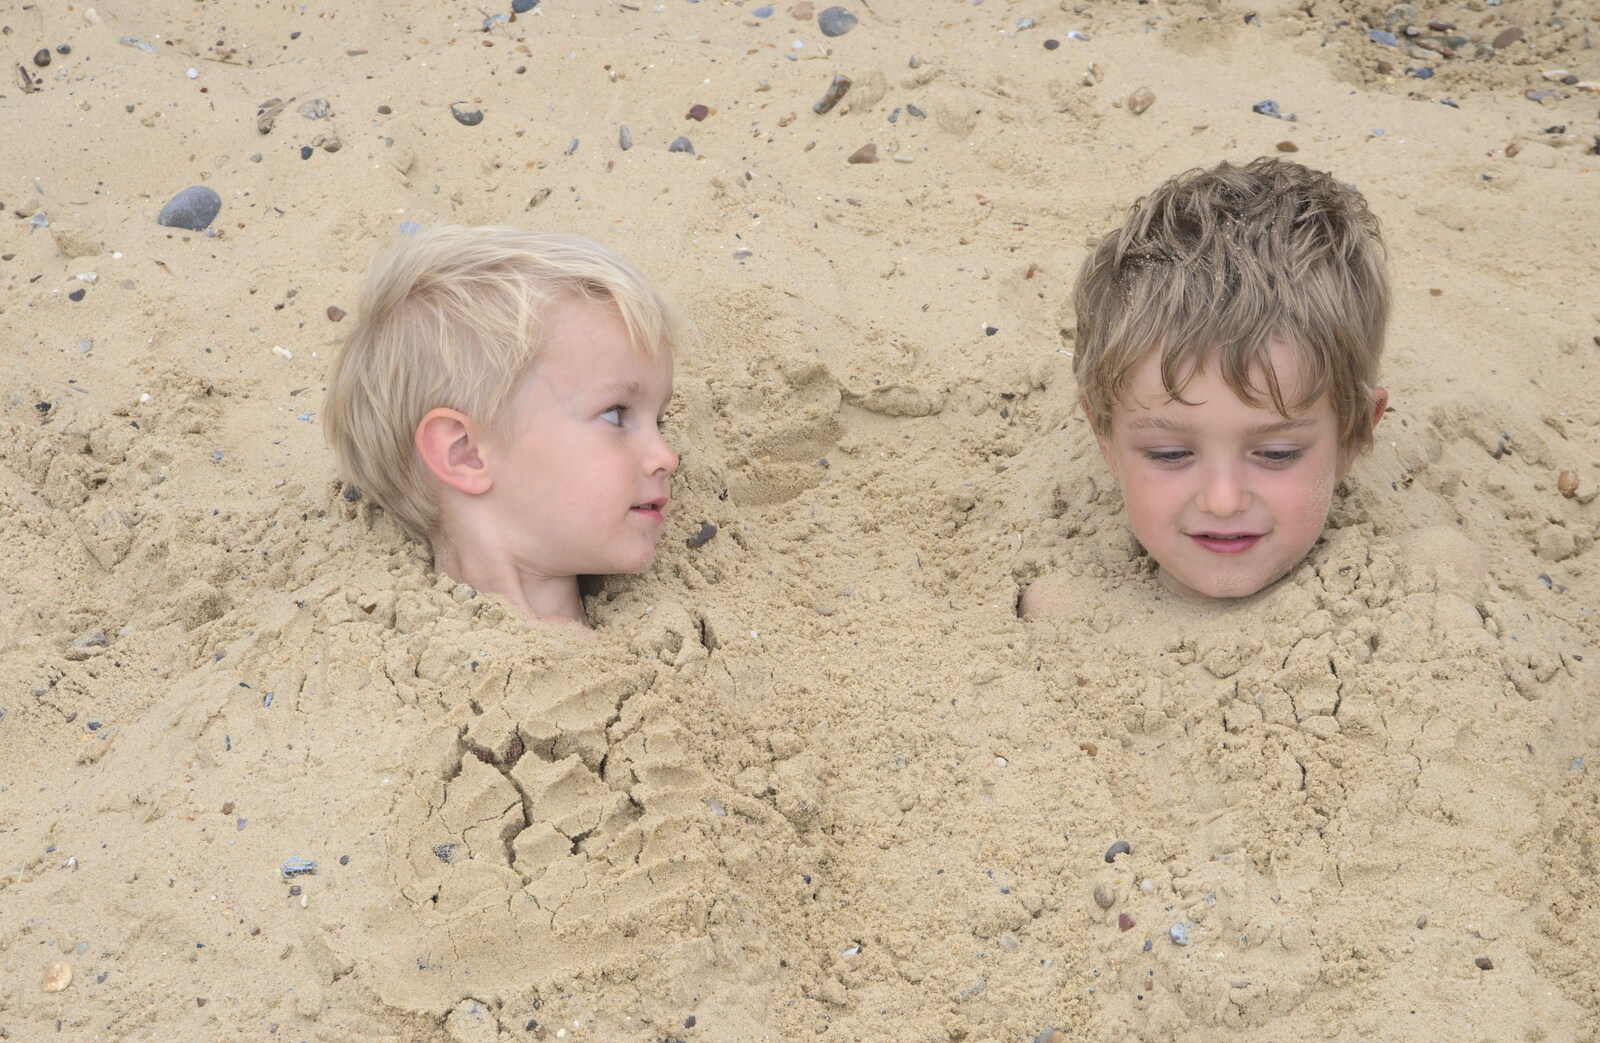 Harry and Fred are just heads in the sand from The Danger of Trees: A Camping (Mis)adventure - Southwold, Suffolk - 3rd August 2015